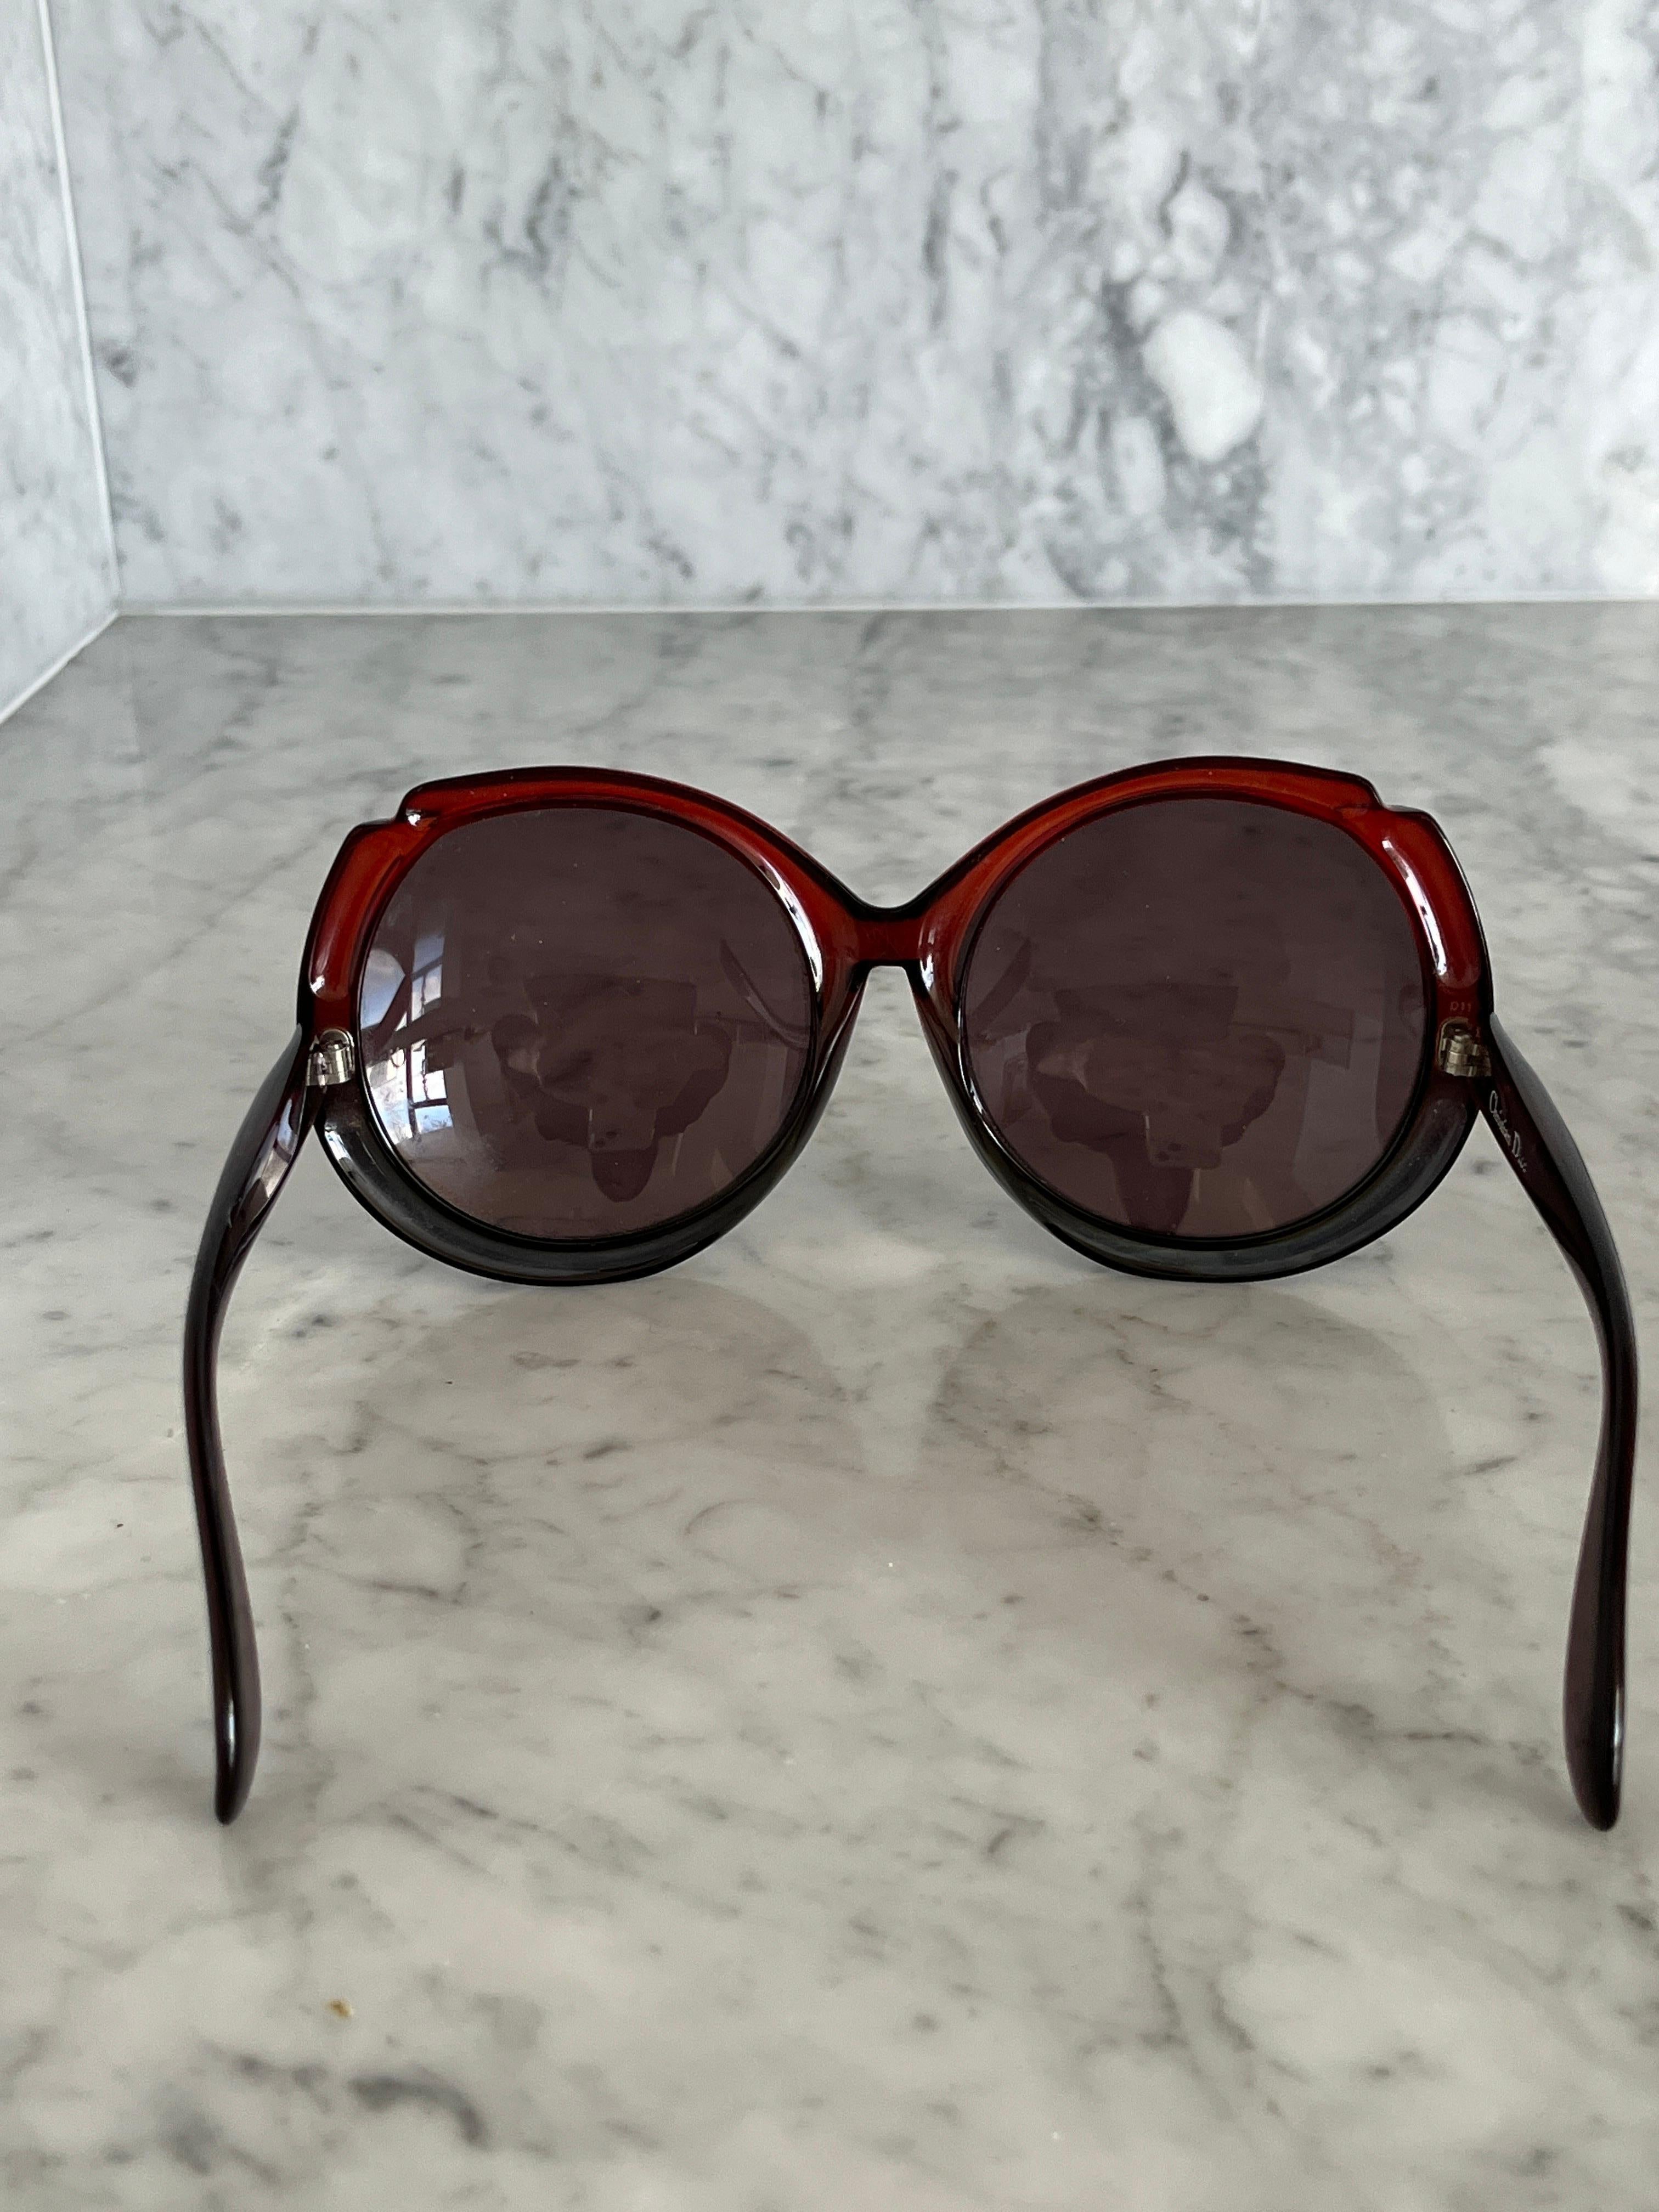 Amazing and rare vintage, Christian Dior sunglasses from the 1970's.

A truly special piece of the early 1970’s eyewear.

Gucci and many other designer labels have copied this style in the last few years but how great is it to have the real thing